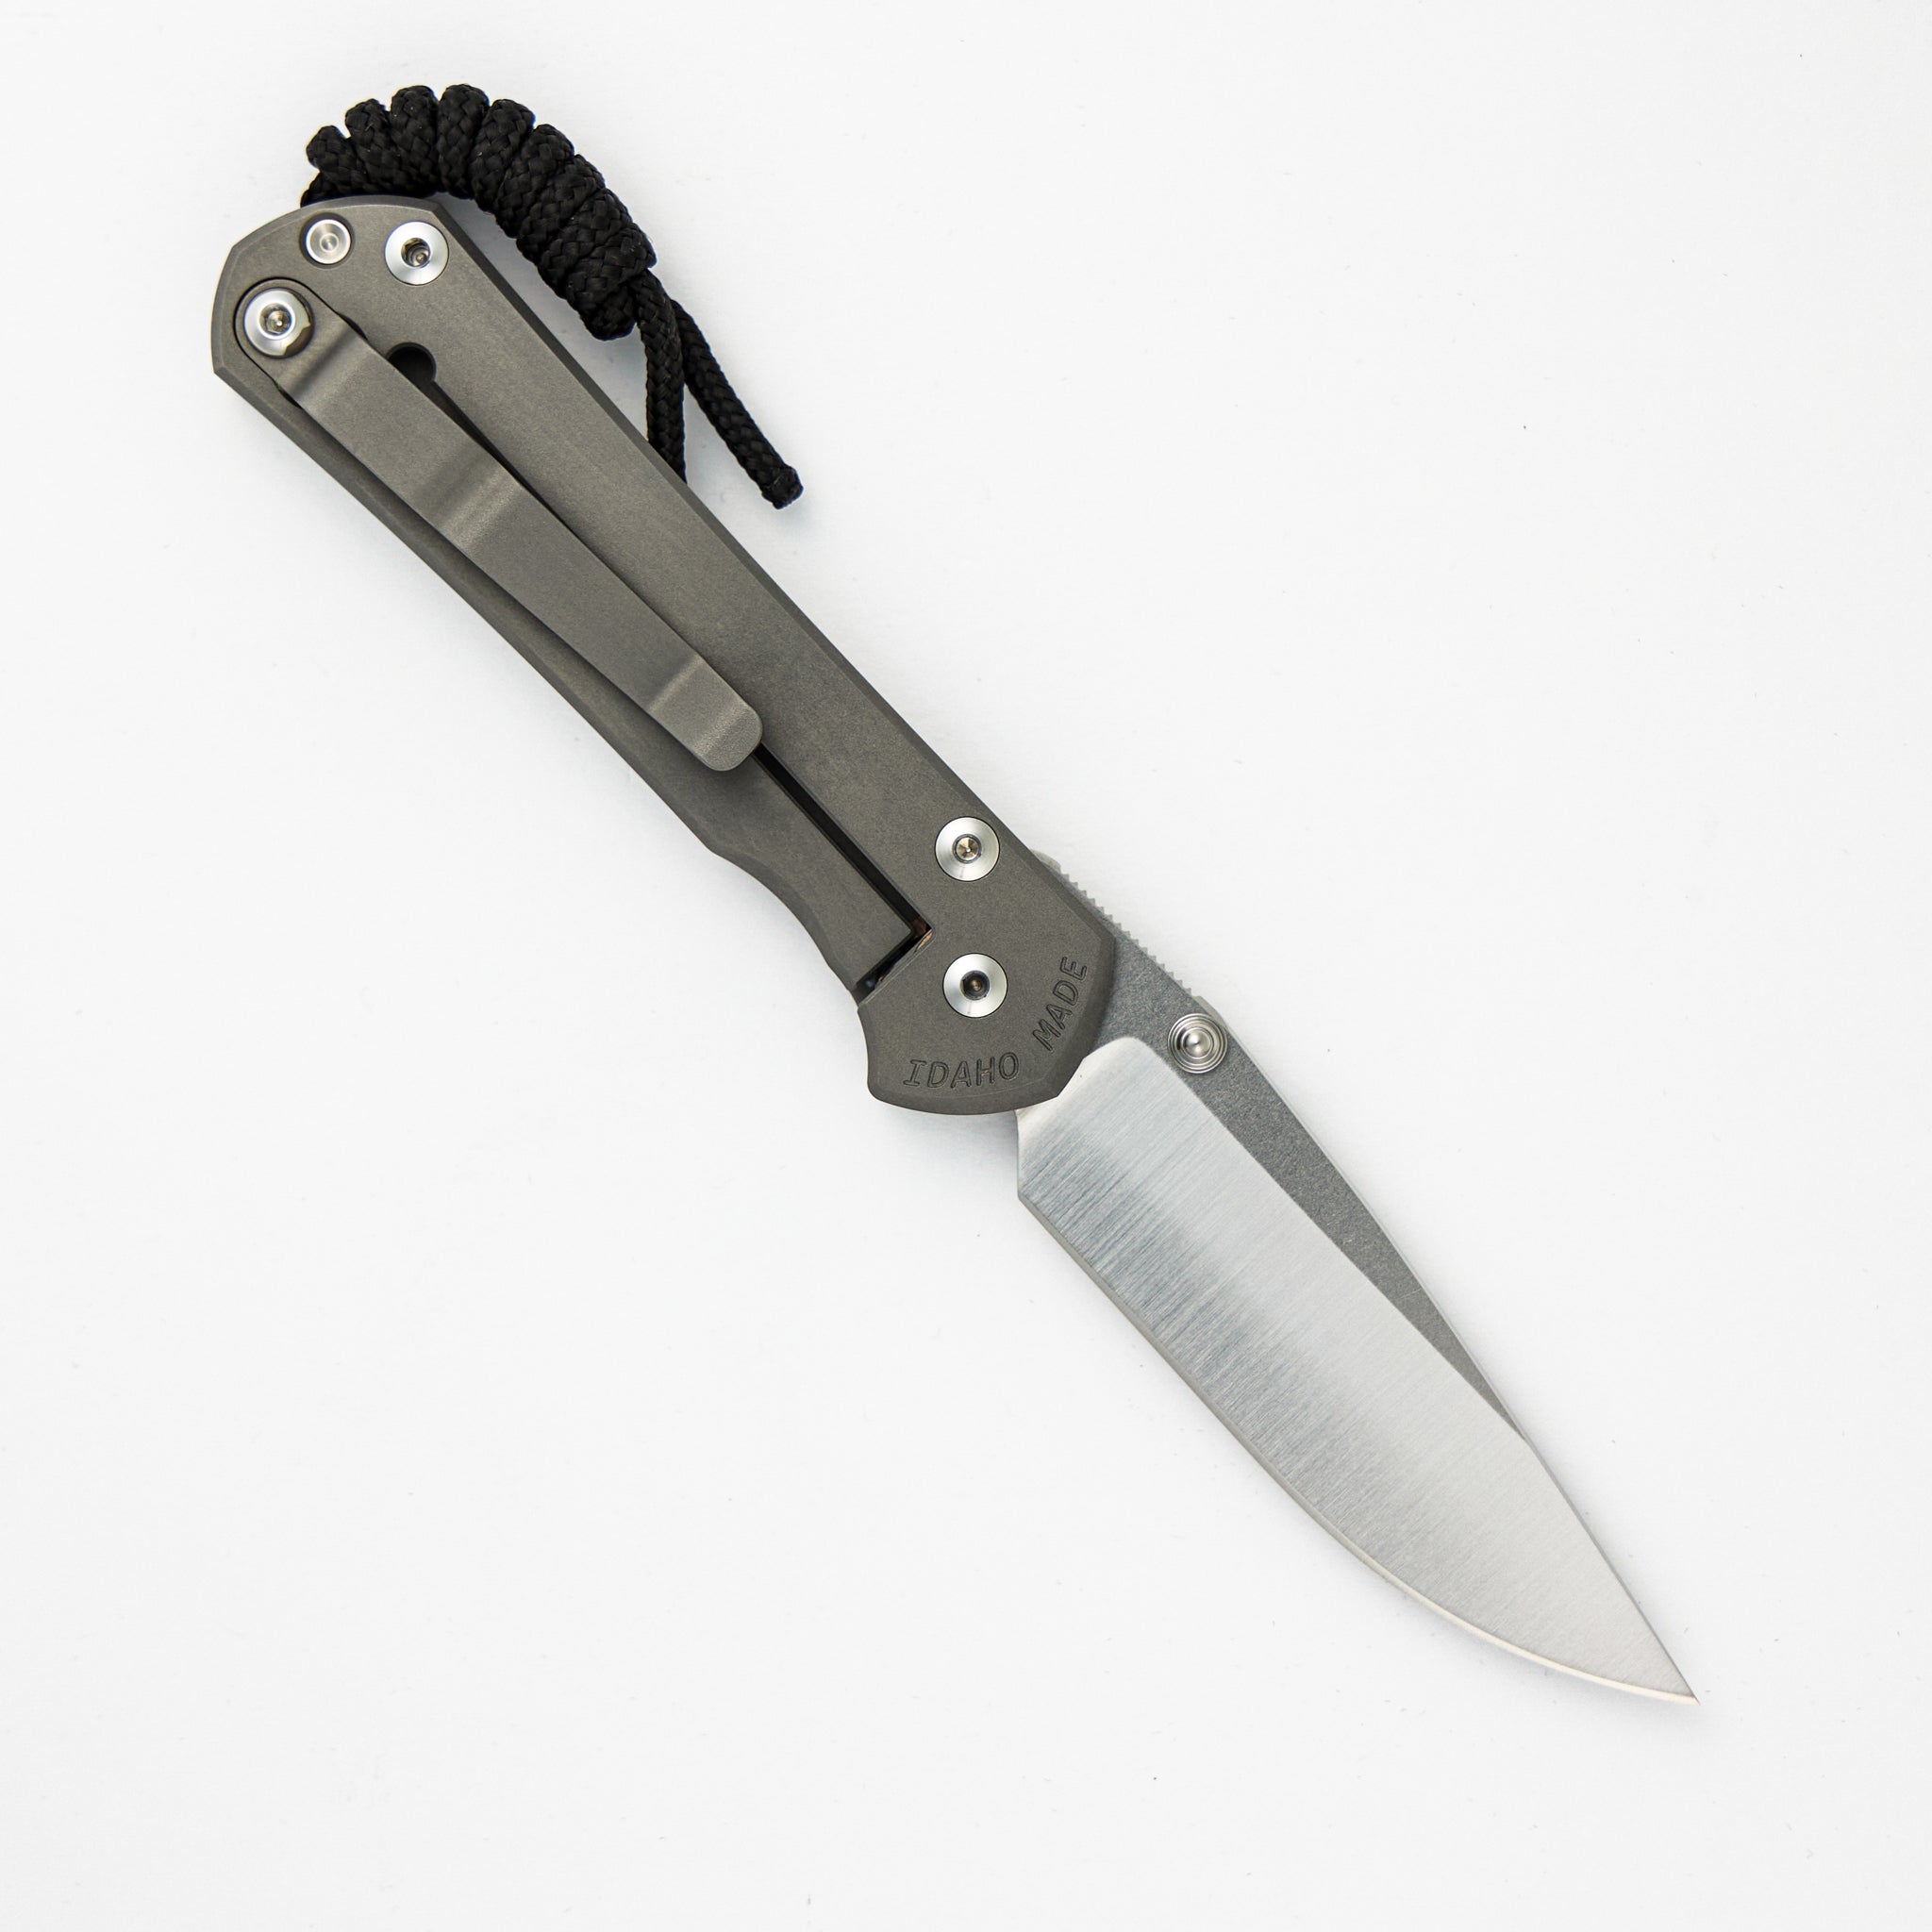 Chris Reeve Small Sebenza 31 - Polished Drop Point CPM MagnaCut Blade - Glass Blasted - Silver Double Thumb Lugs